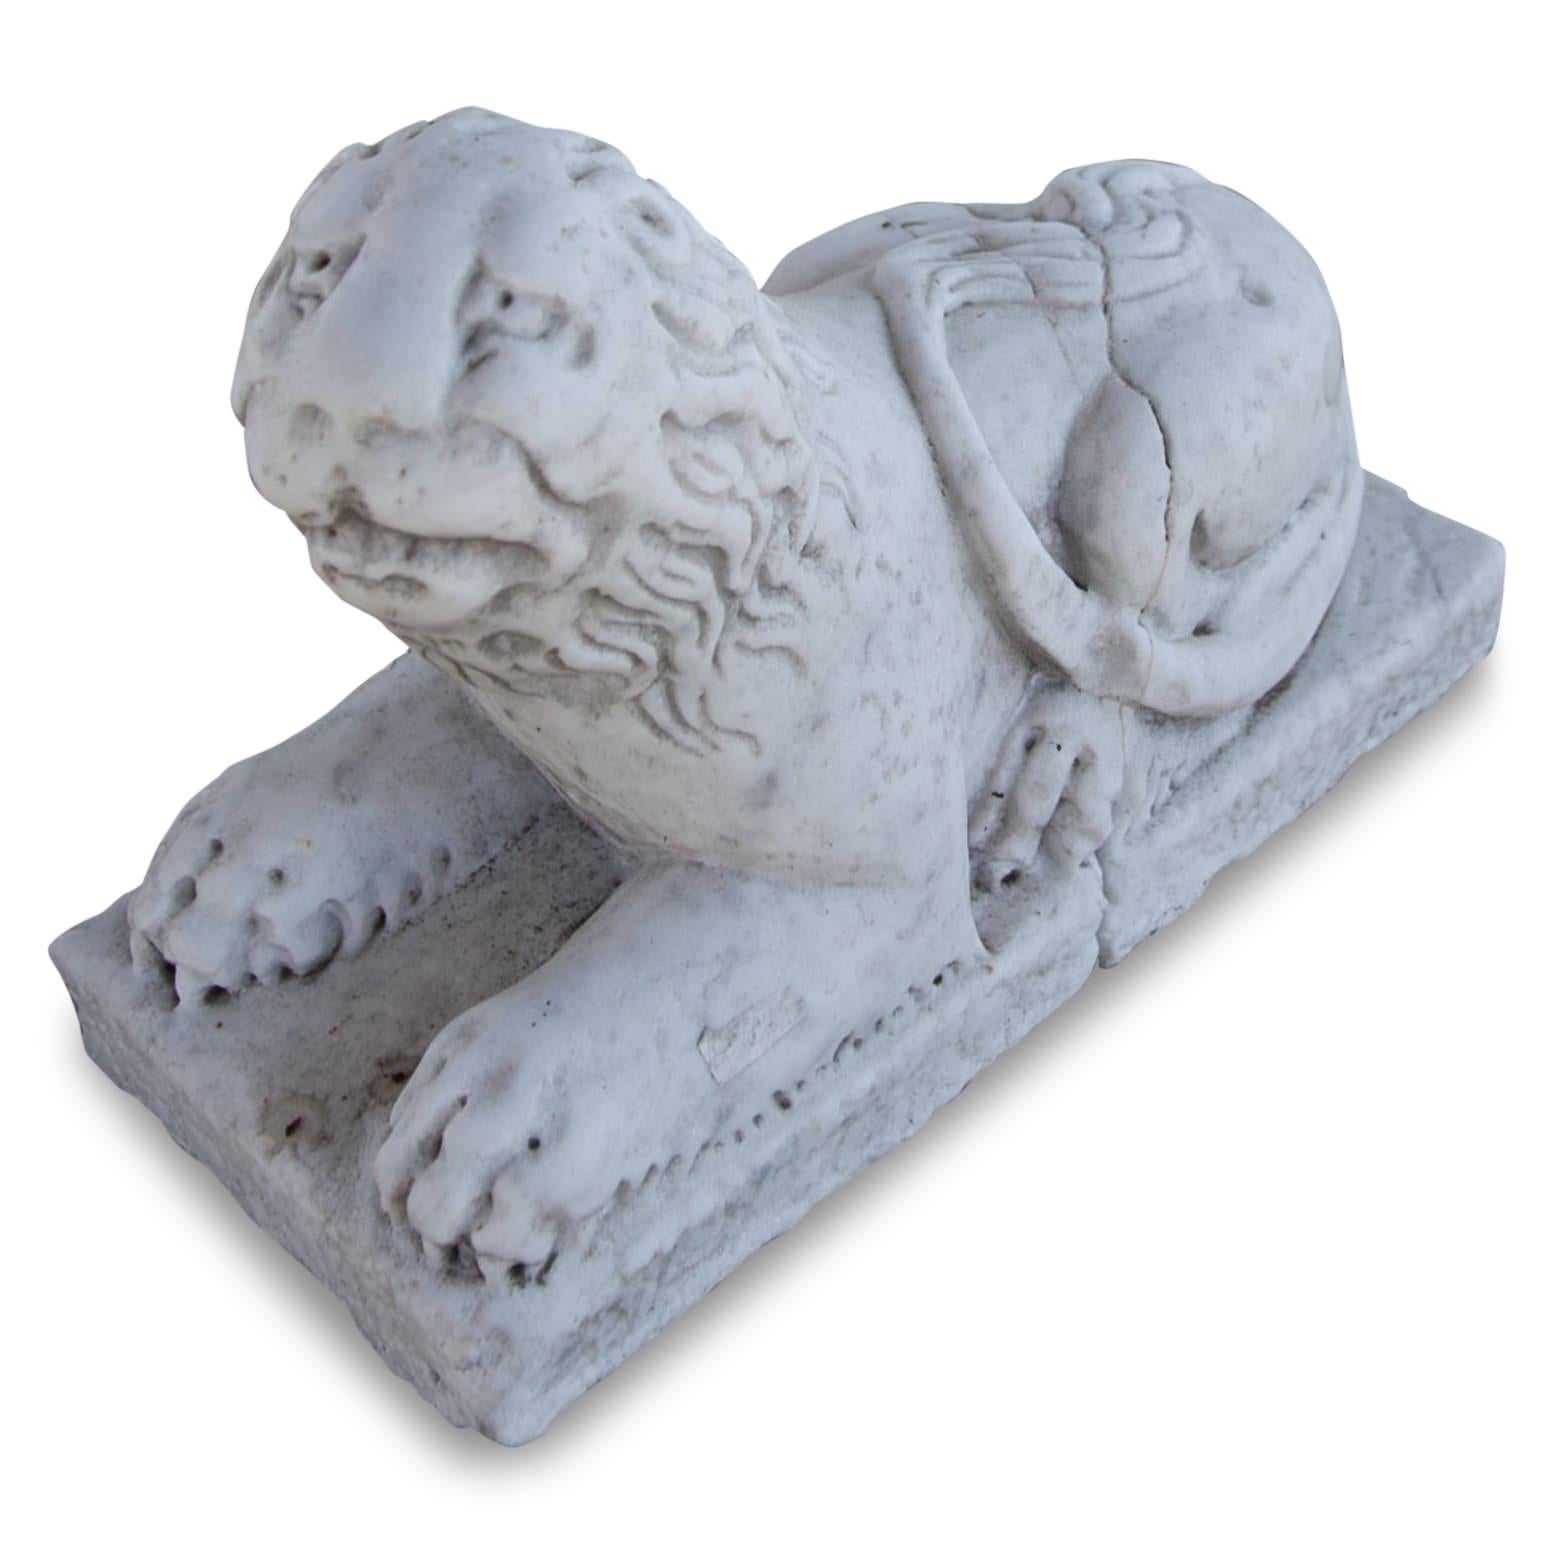 Small pair of hand-carved marble lions in an antique style.